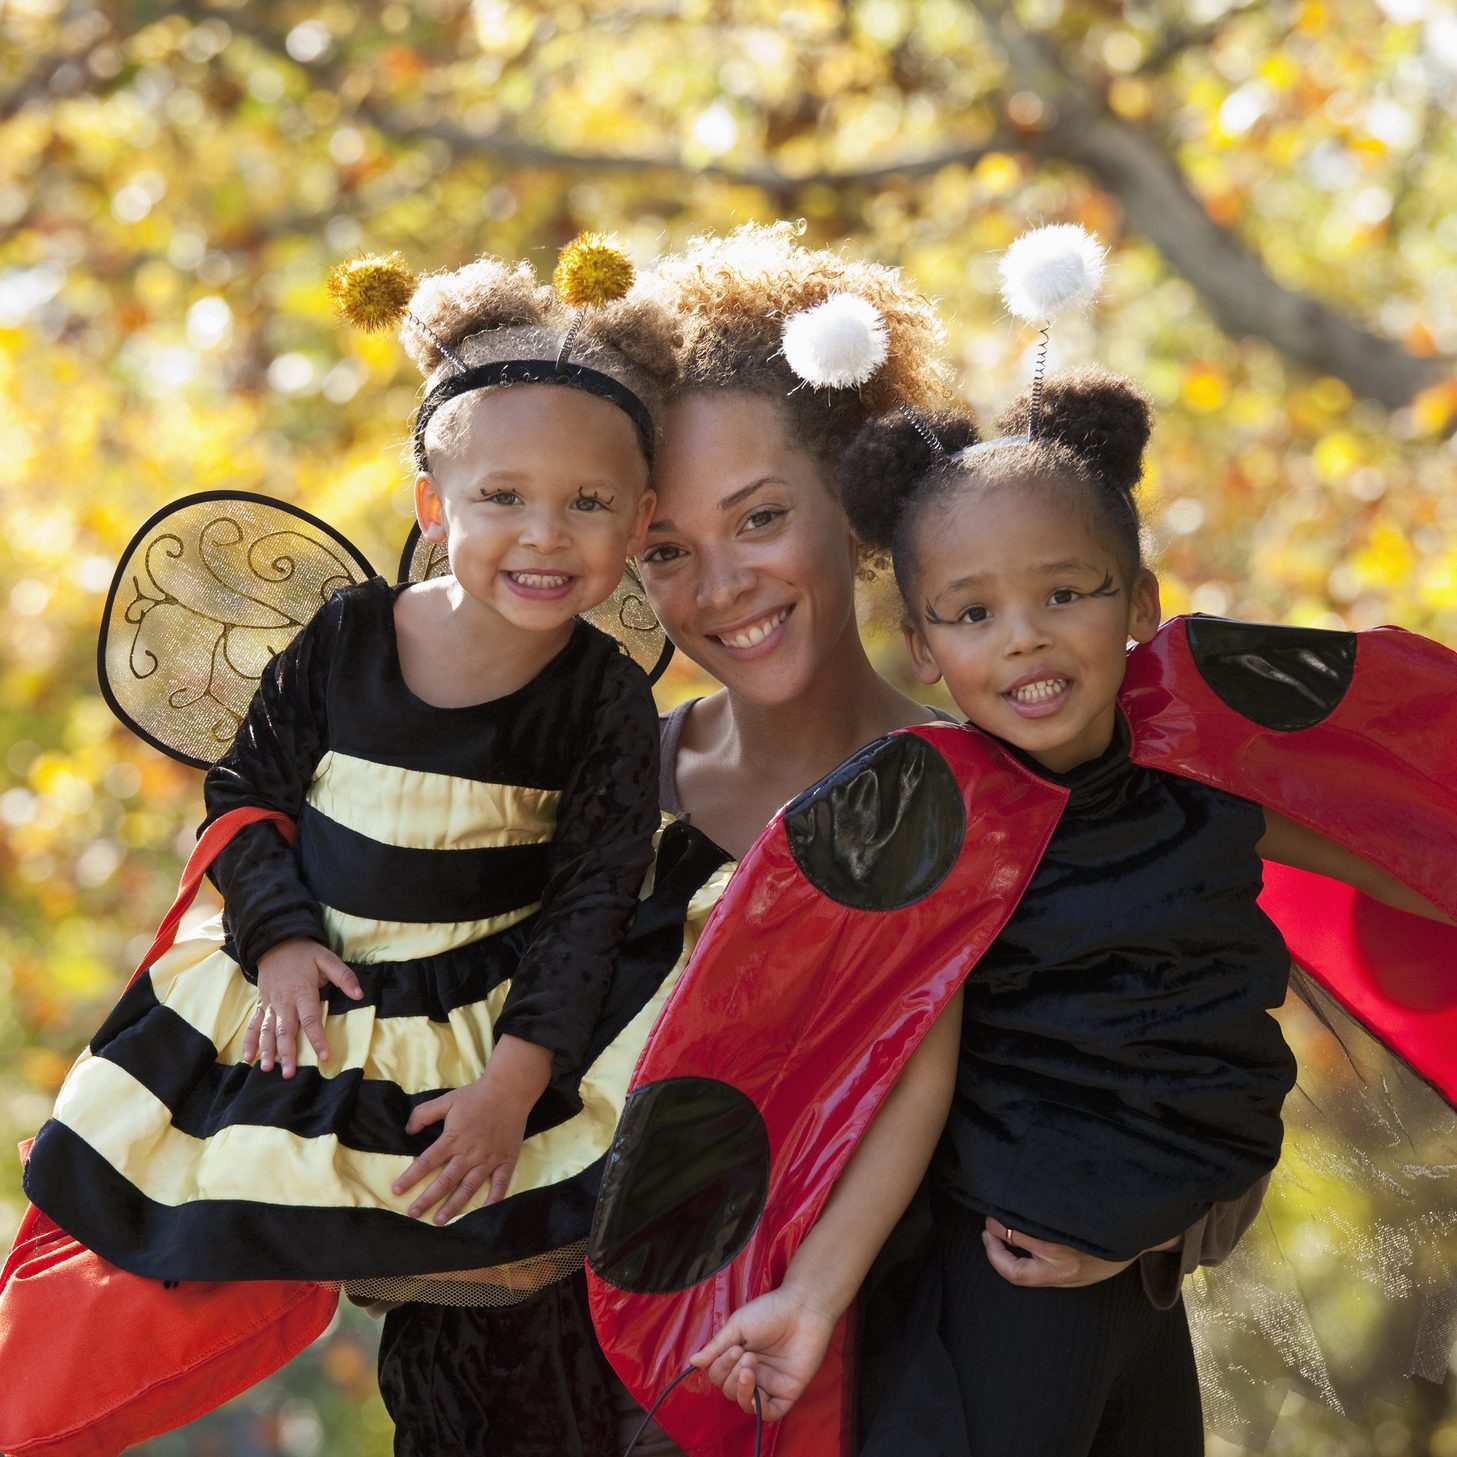 mother smiling with her two daughters dressed up as a bumble bee and a lady bug for halloween